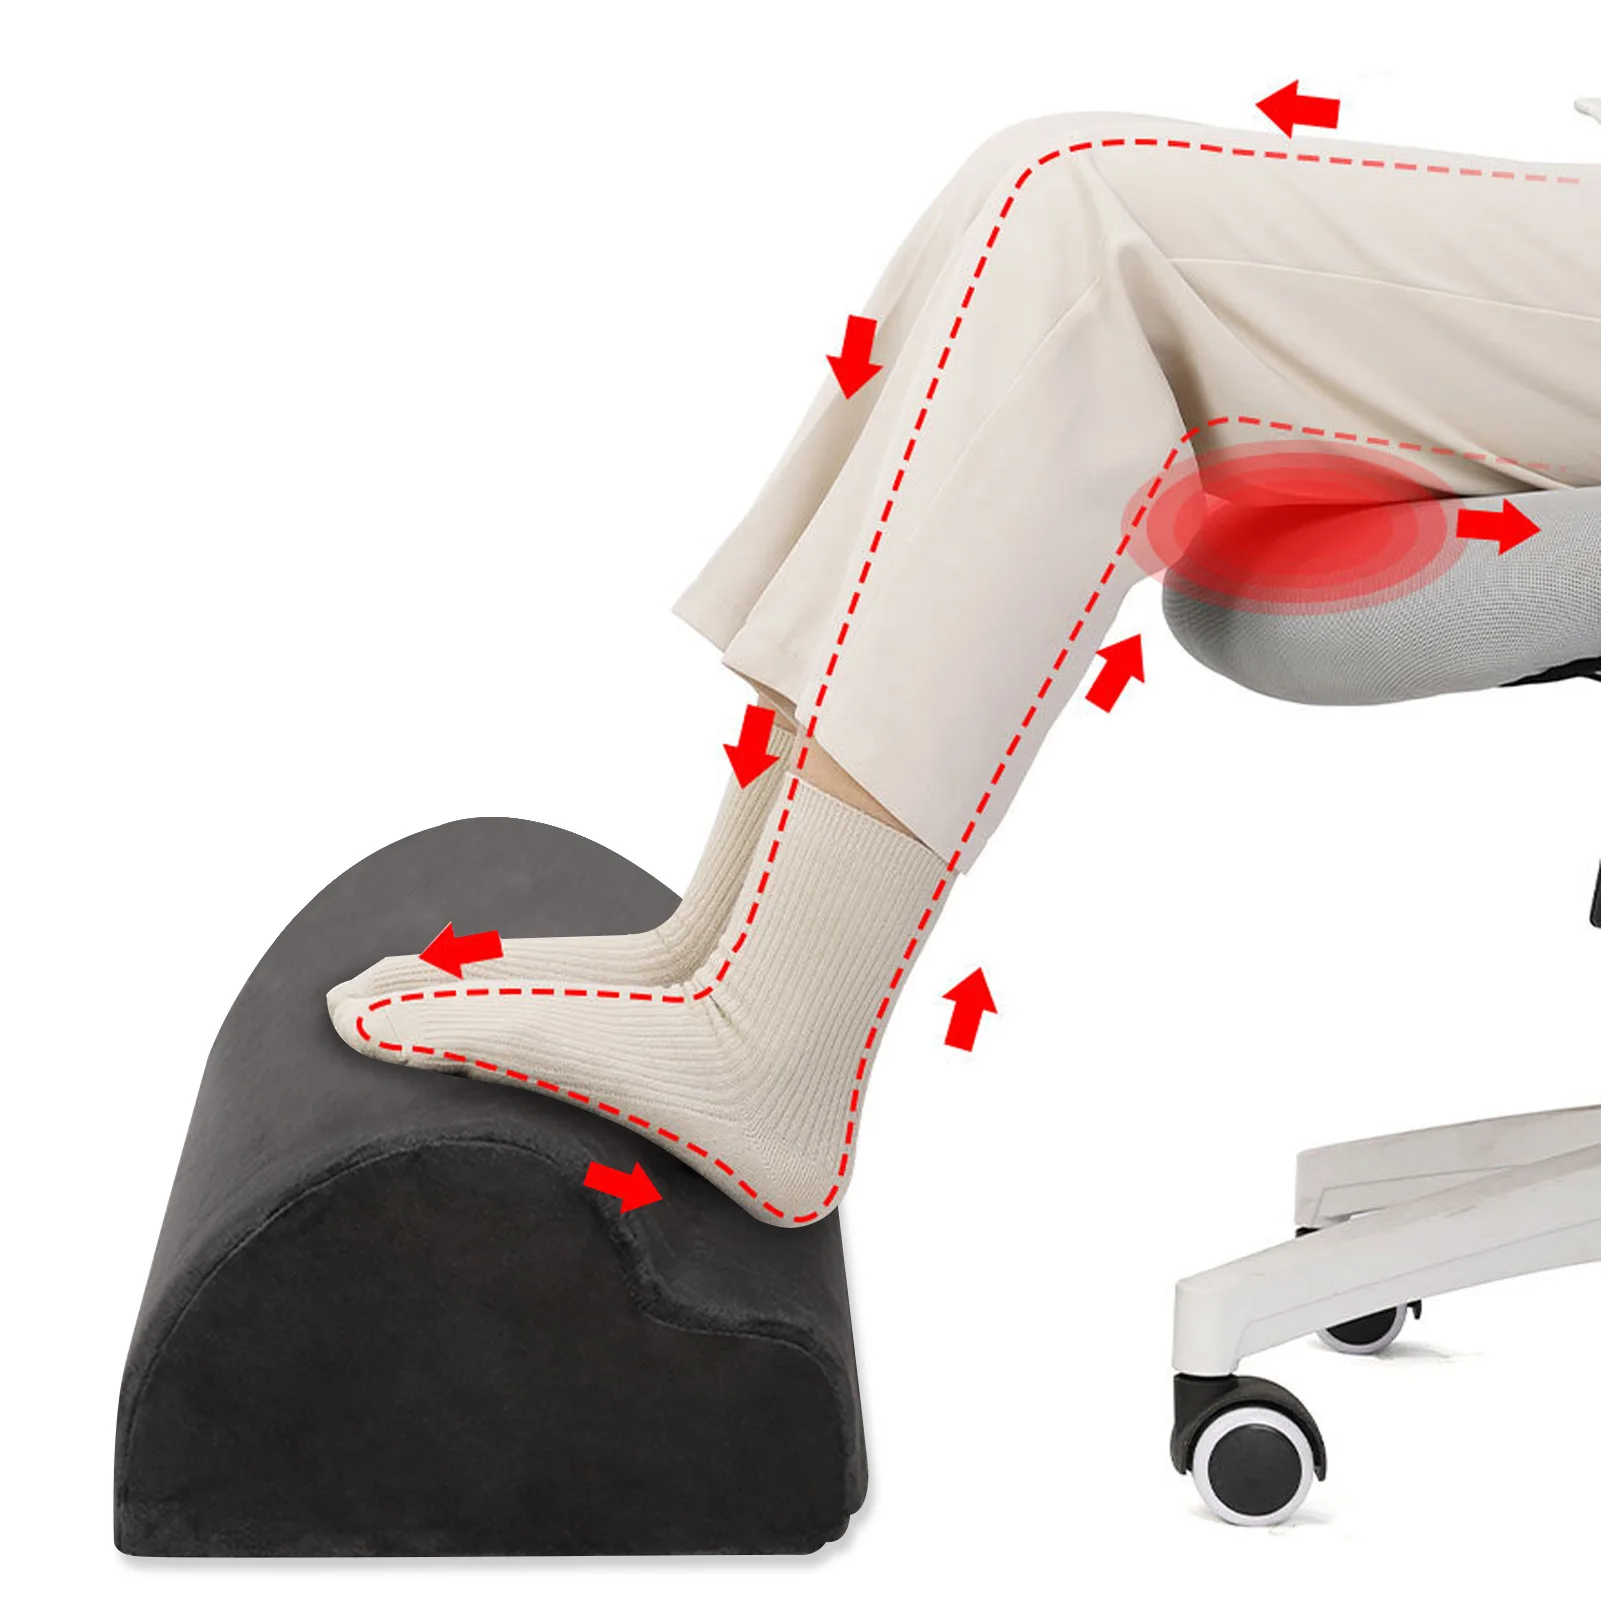 Memory Foam Footrest For Office Using Washable Comfortable Cloud-shaped Foot Massage Cushion Judicious | Дом и сад